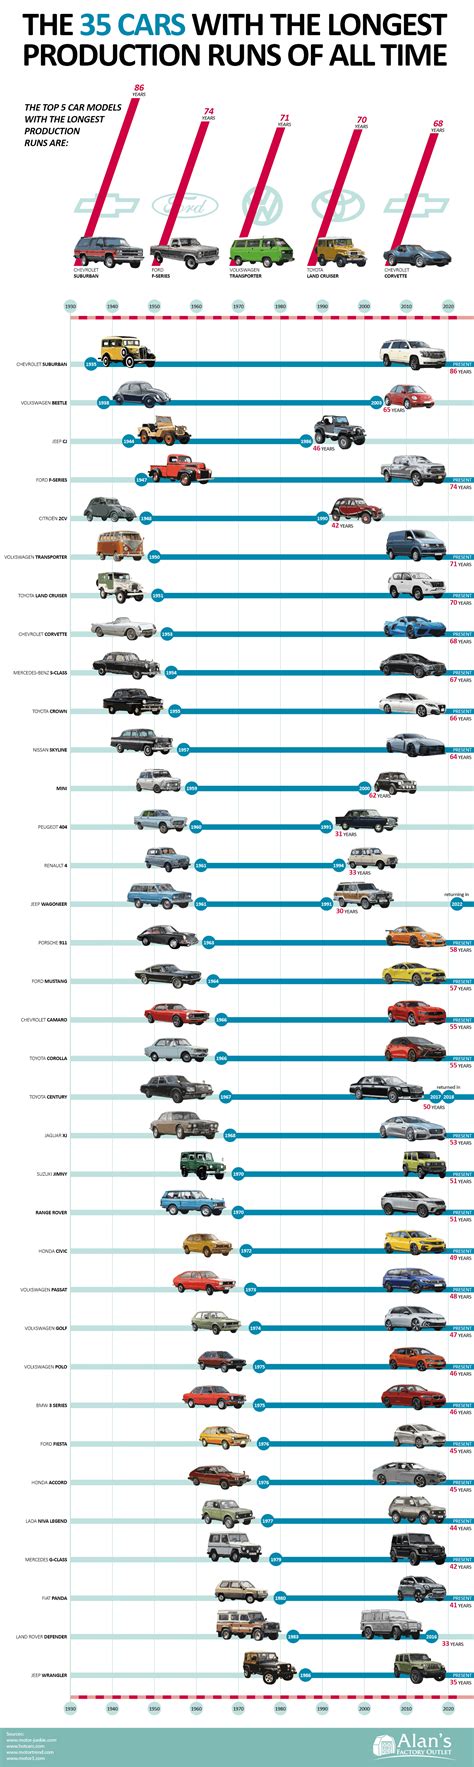 35 Cars With The Longest Production Runs In The World